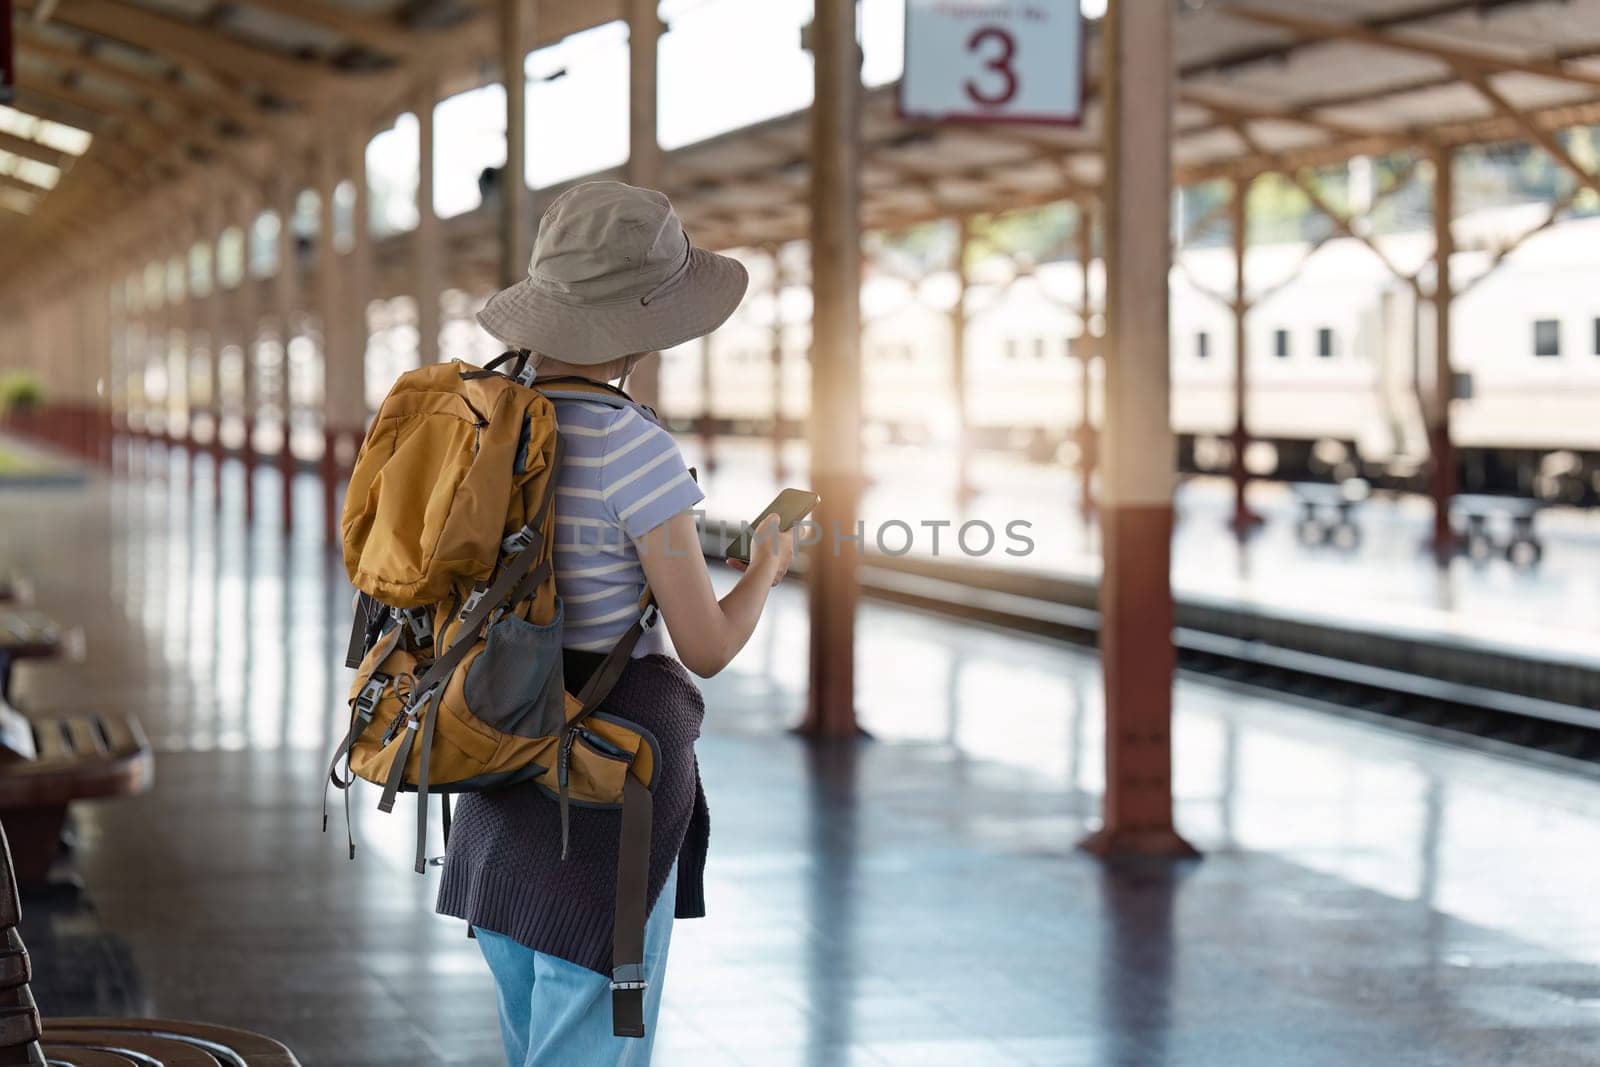 Solo Traveler with Backpack and Hat Waiting at Train Station Platform, Checking Phone for Travel Updates, Adventure and Exploration Concept by itchaznong